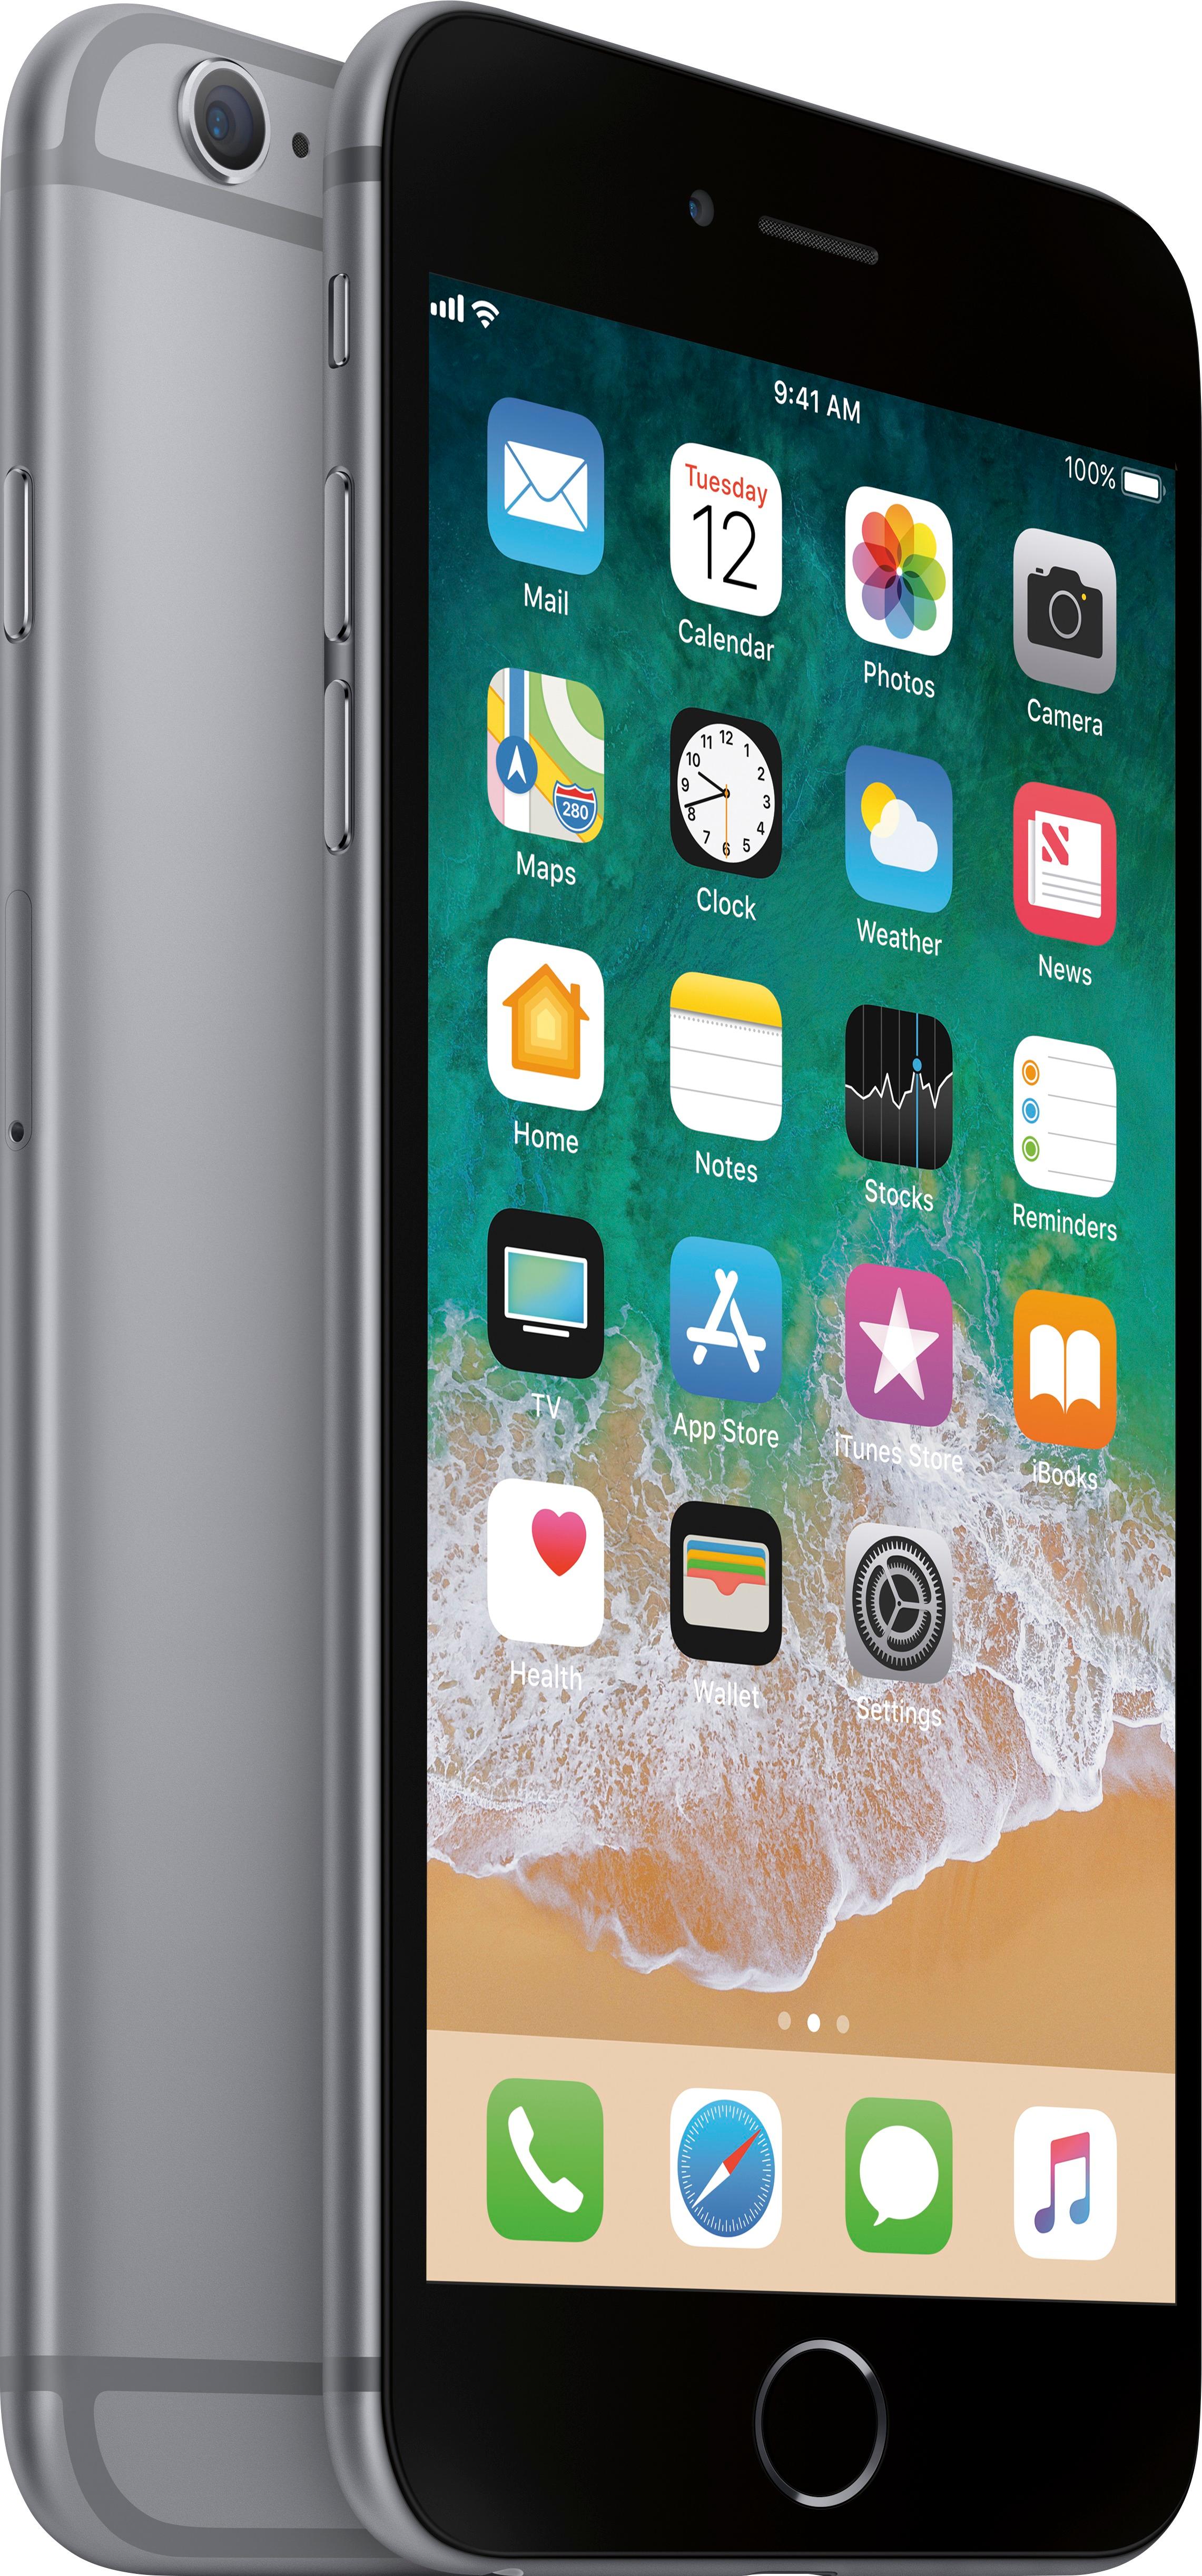 Angle View: Simple Mobile - Apple iPhone 6s Plus 4G LTE with 32GB Memory Prepaid Cell Phone - Space Gray